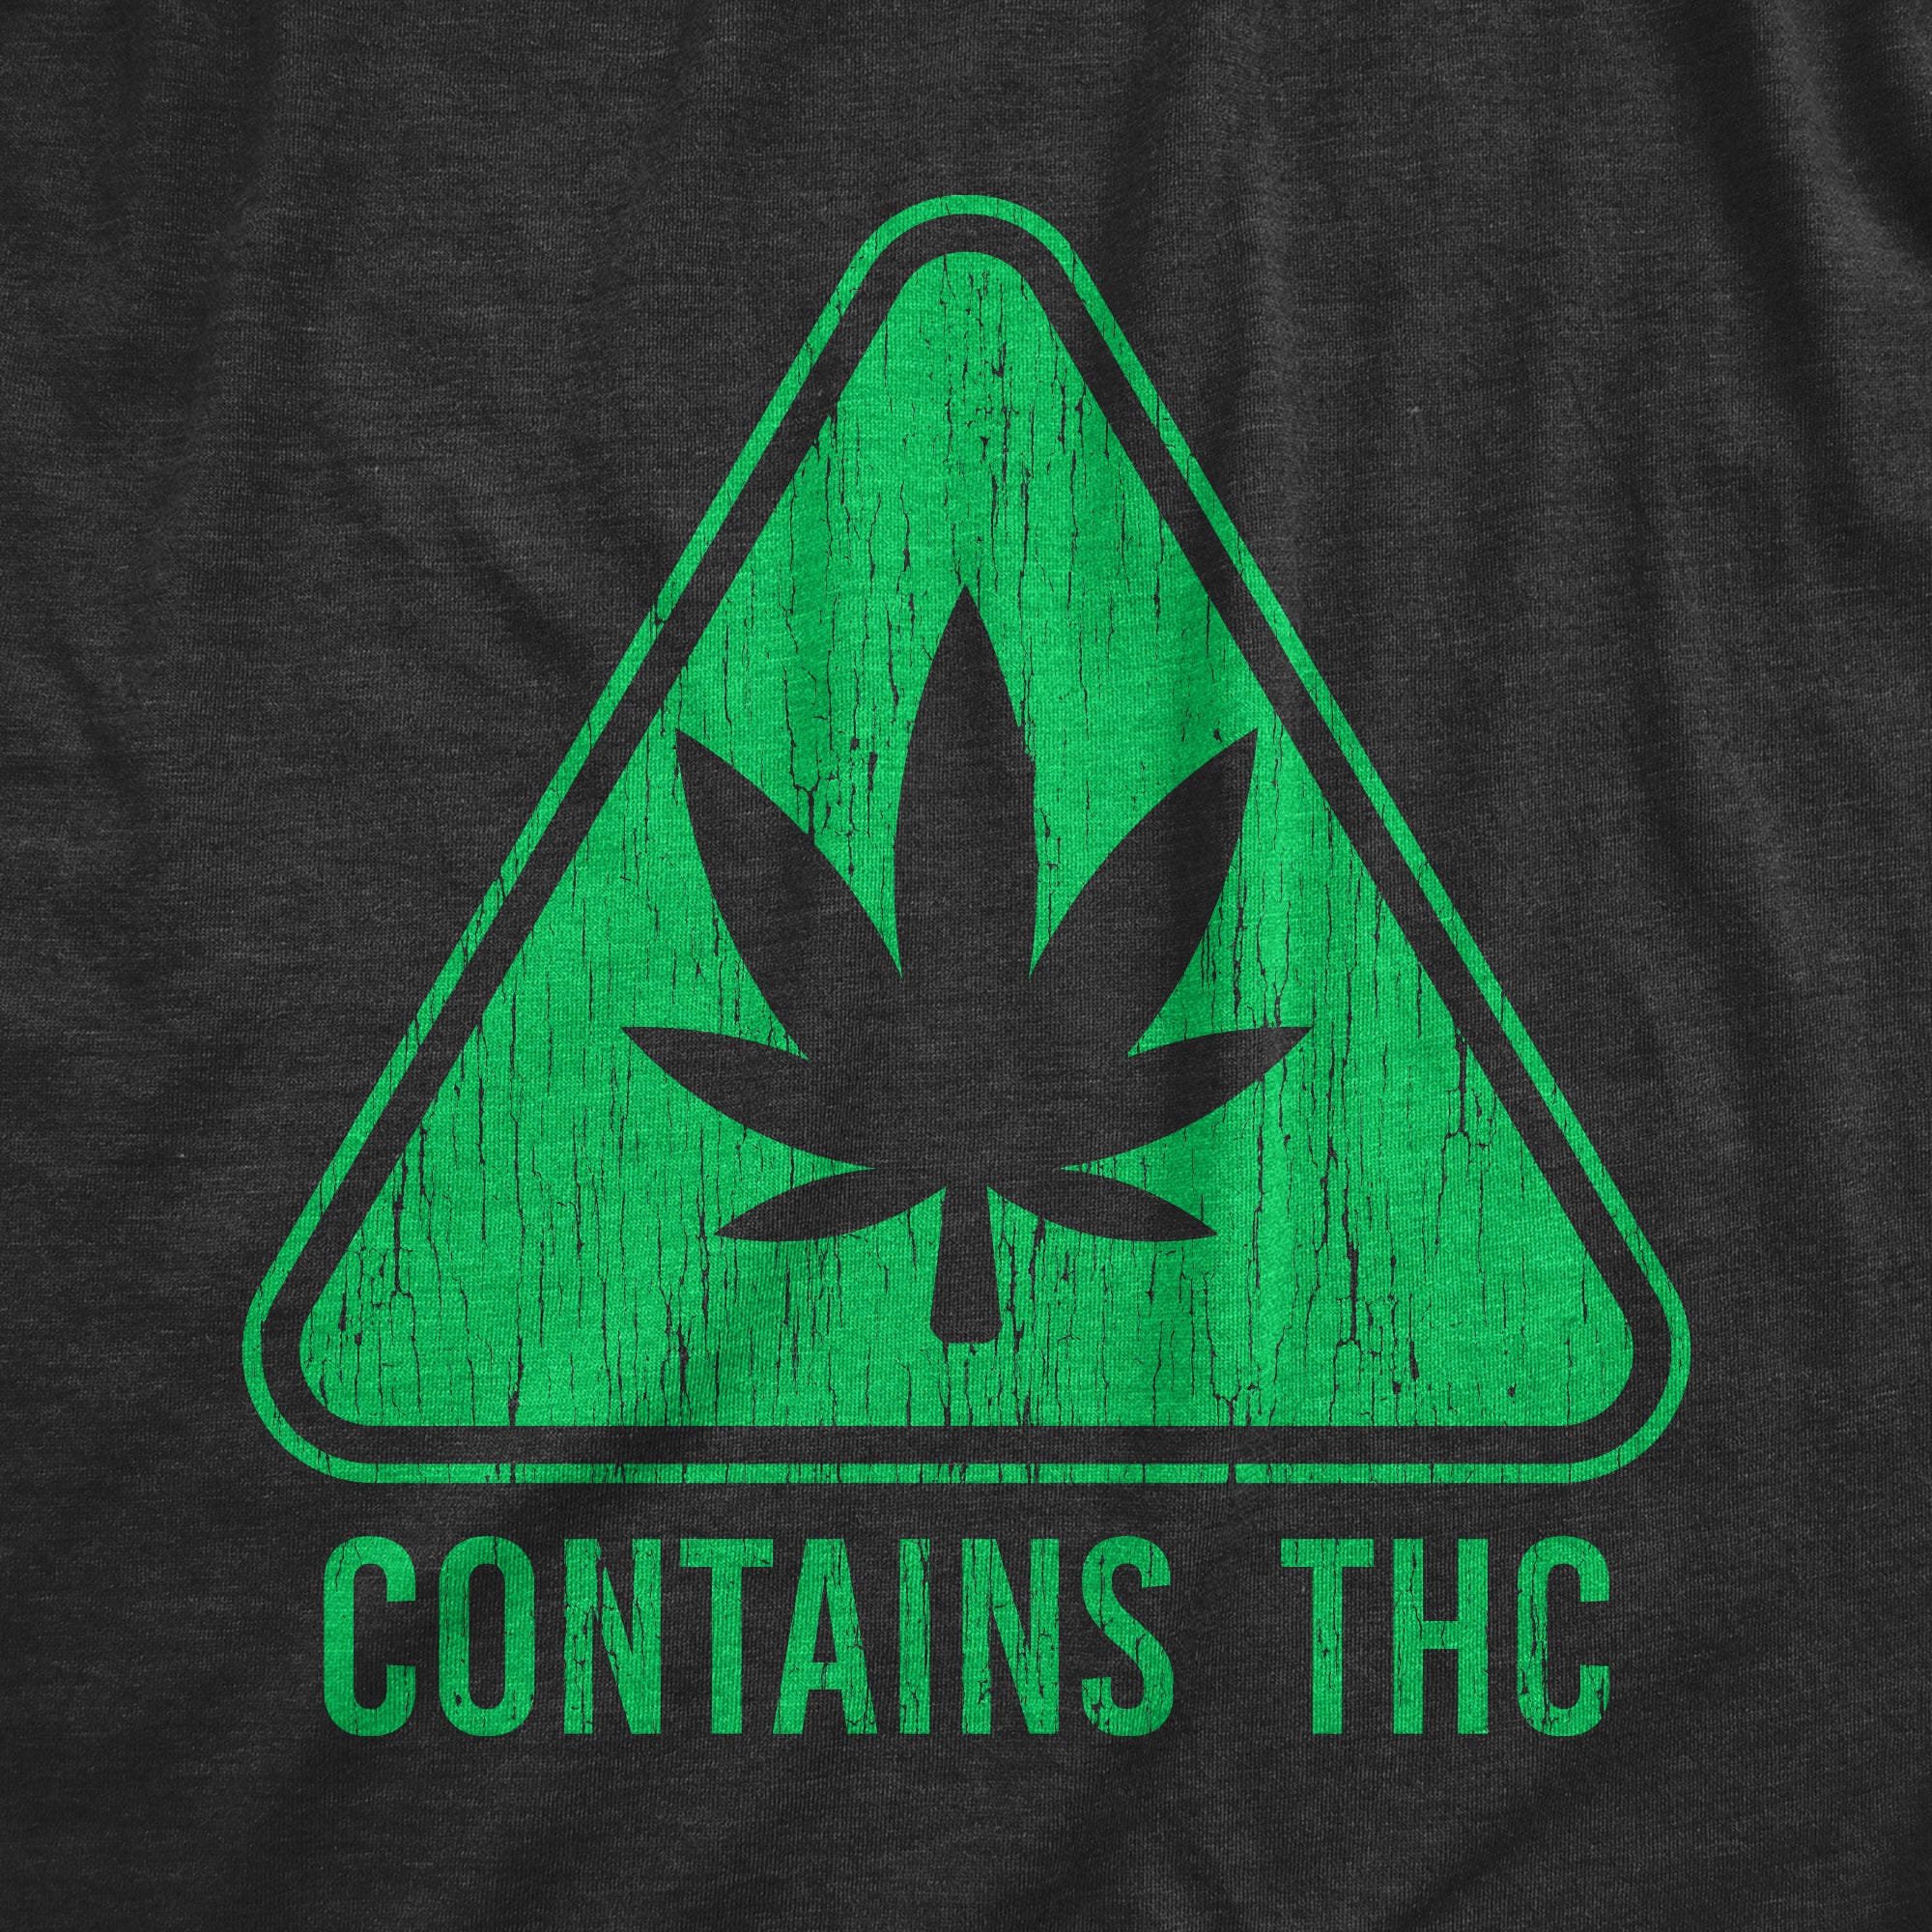 Funny Heather Black - THC Contains THC Womens T Shirt Nerdy 420 Tee